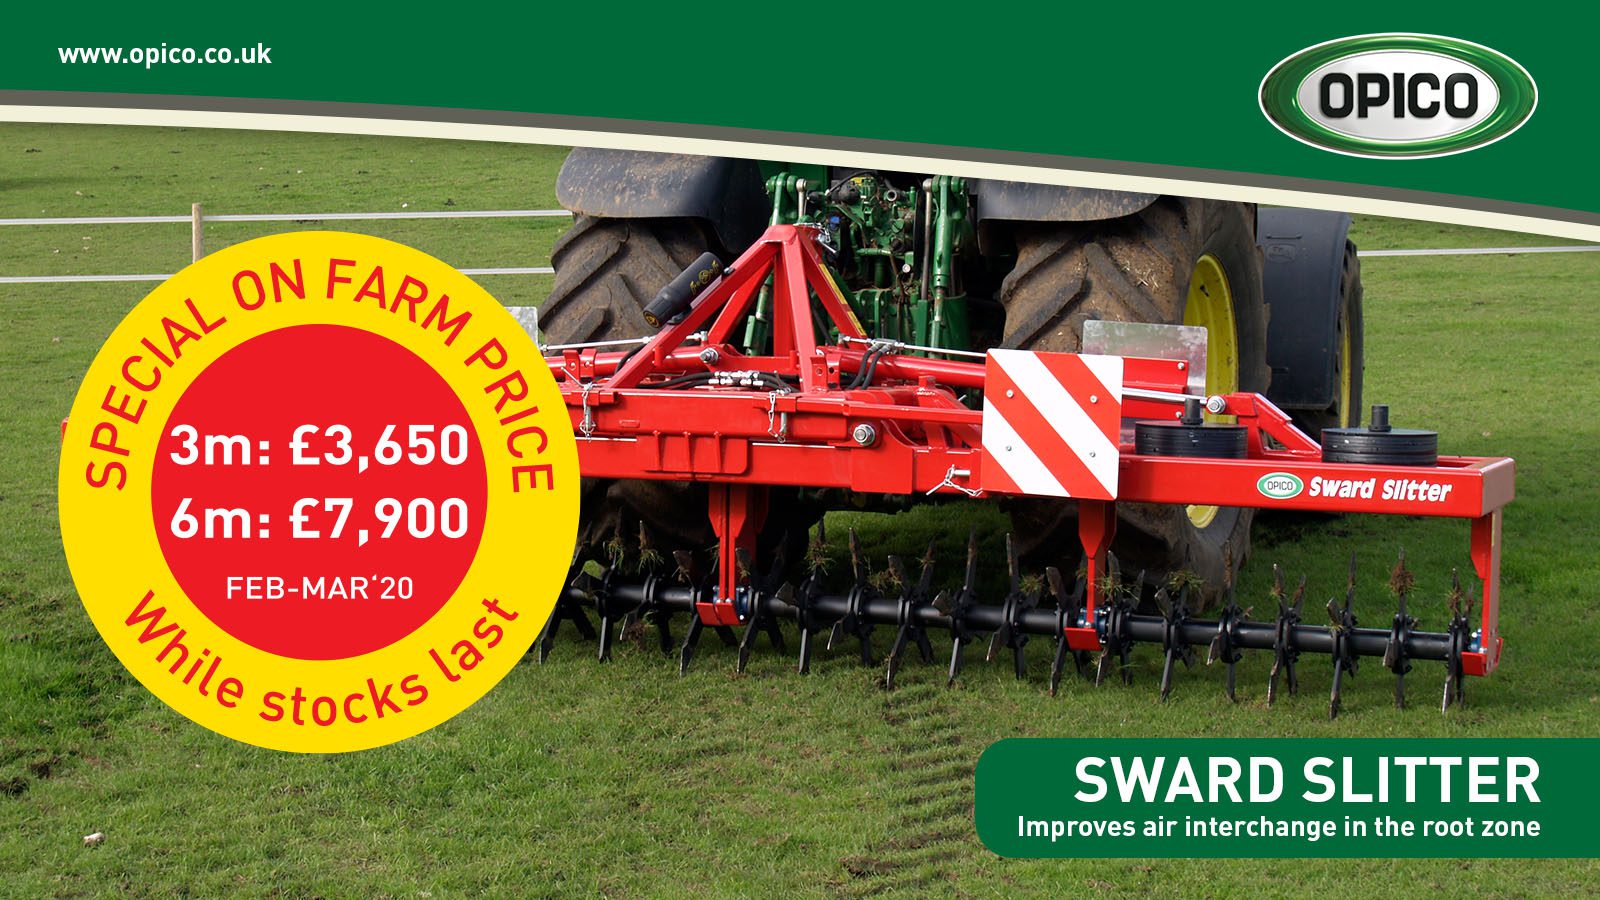 Opico Sward Slitter Special on Farm Price